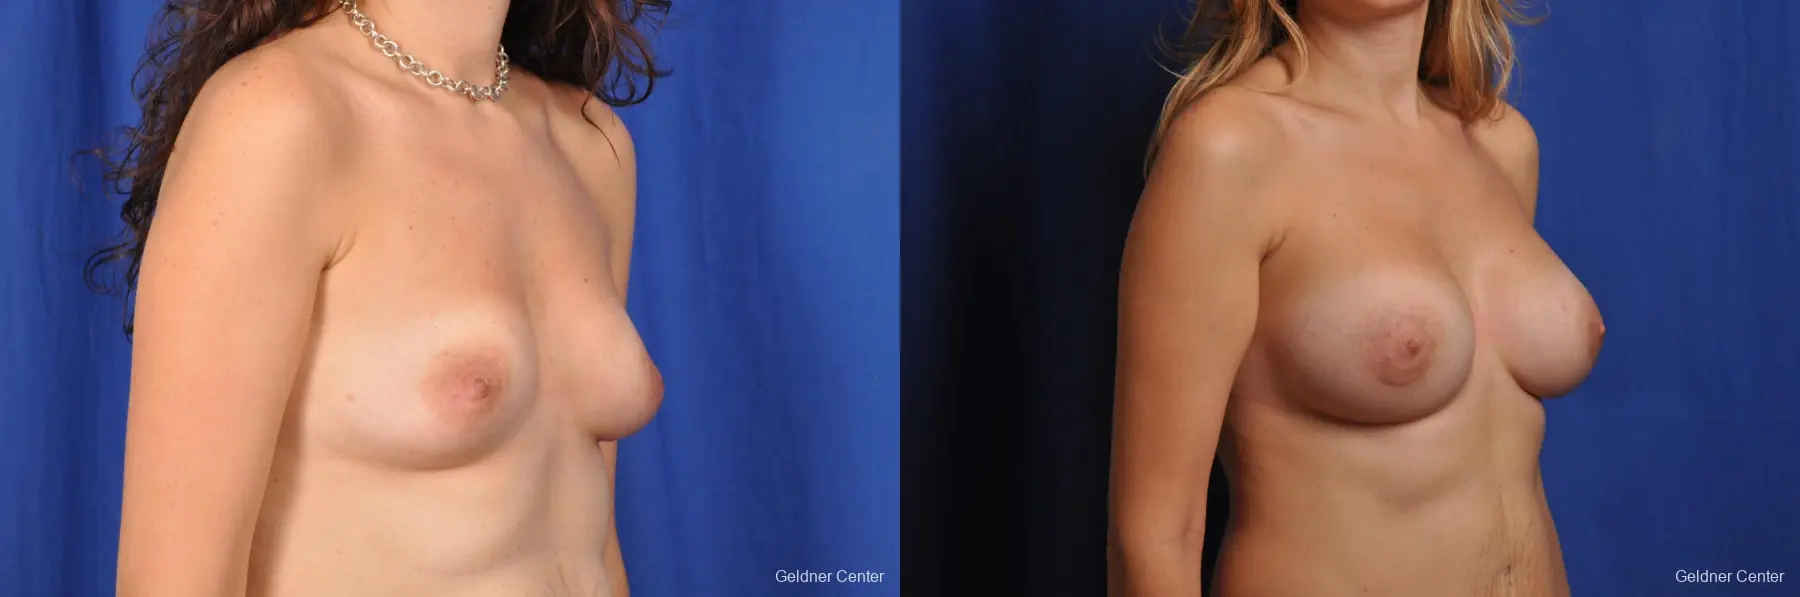 Breast Augmentation Streeterville, Chicago 2370 - Before and After 3